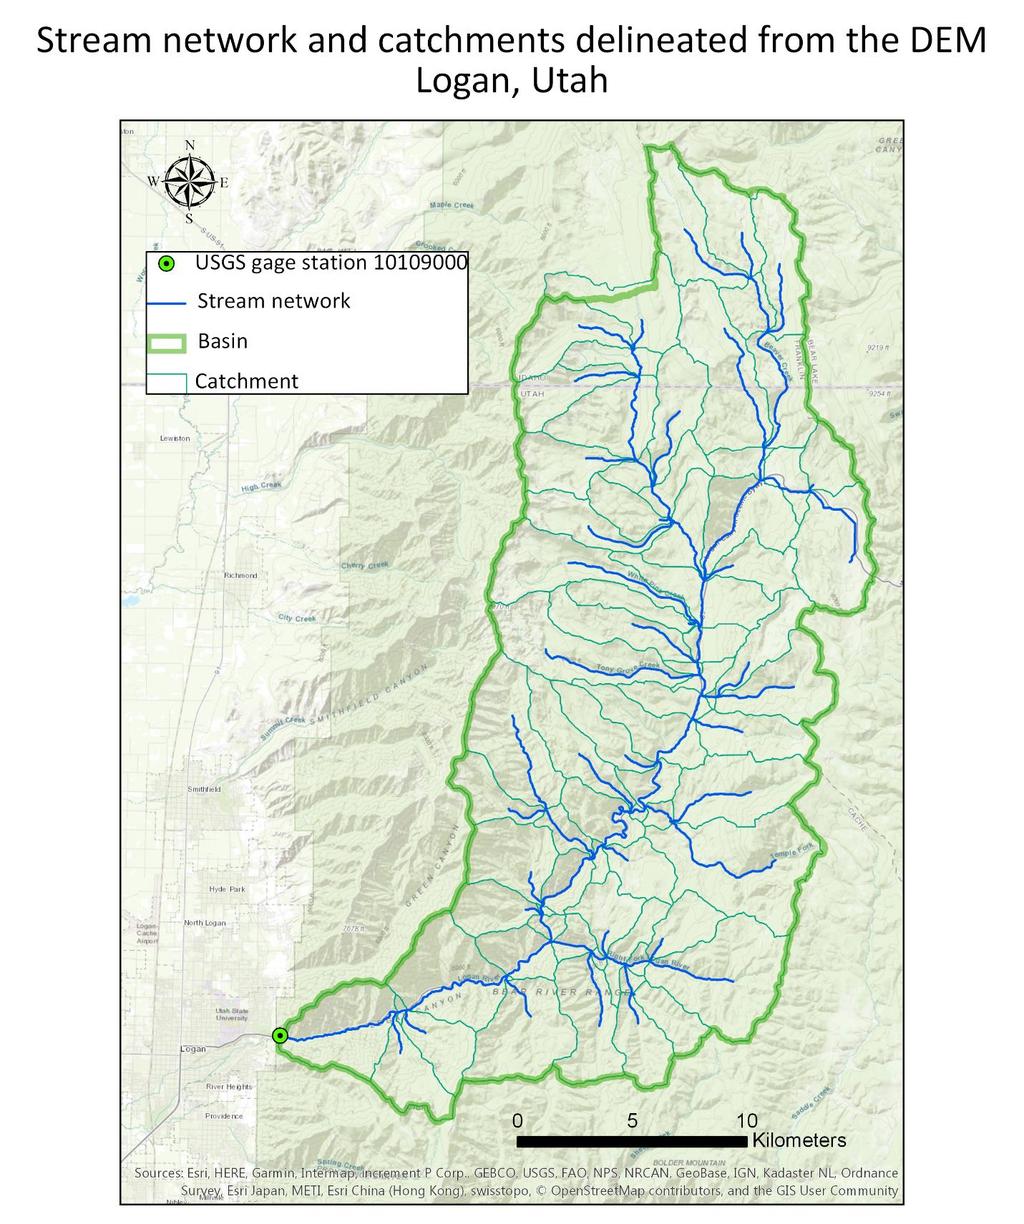 8. Prepare a layout showing the stream network and catchments delineated directly from the DEM. 9.